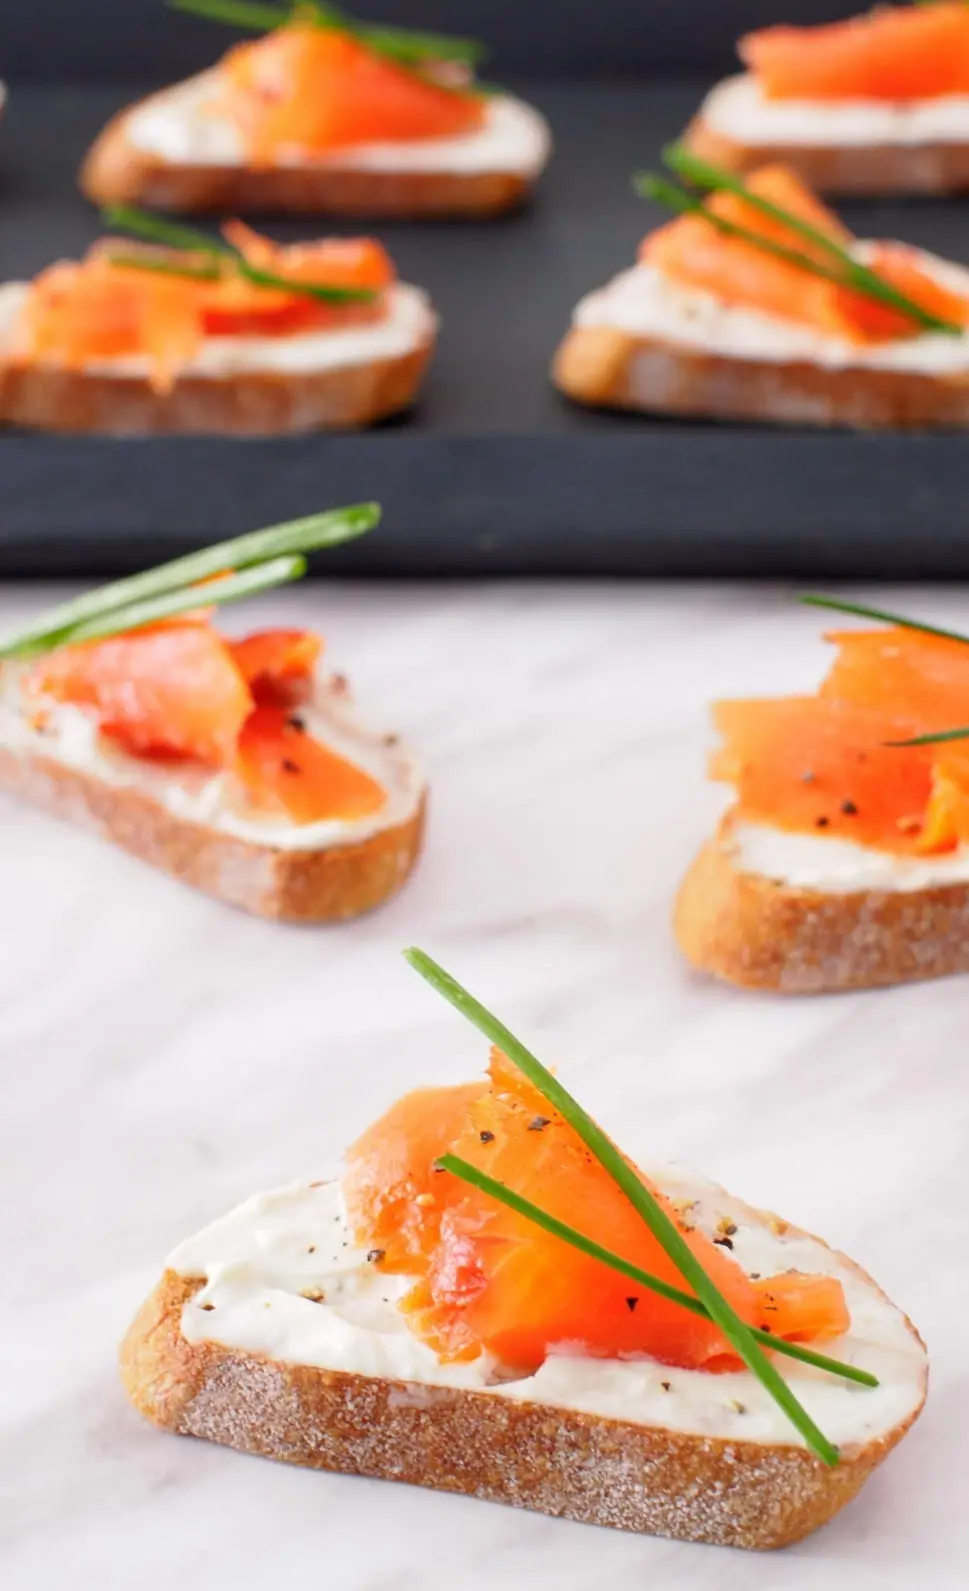 boursin and smoked salmon - Is Boursin cheese good on a bagel